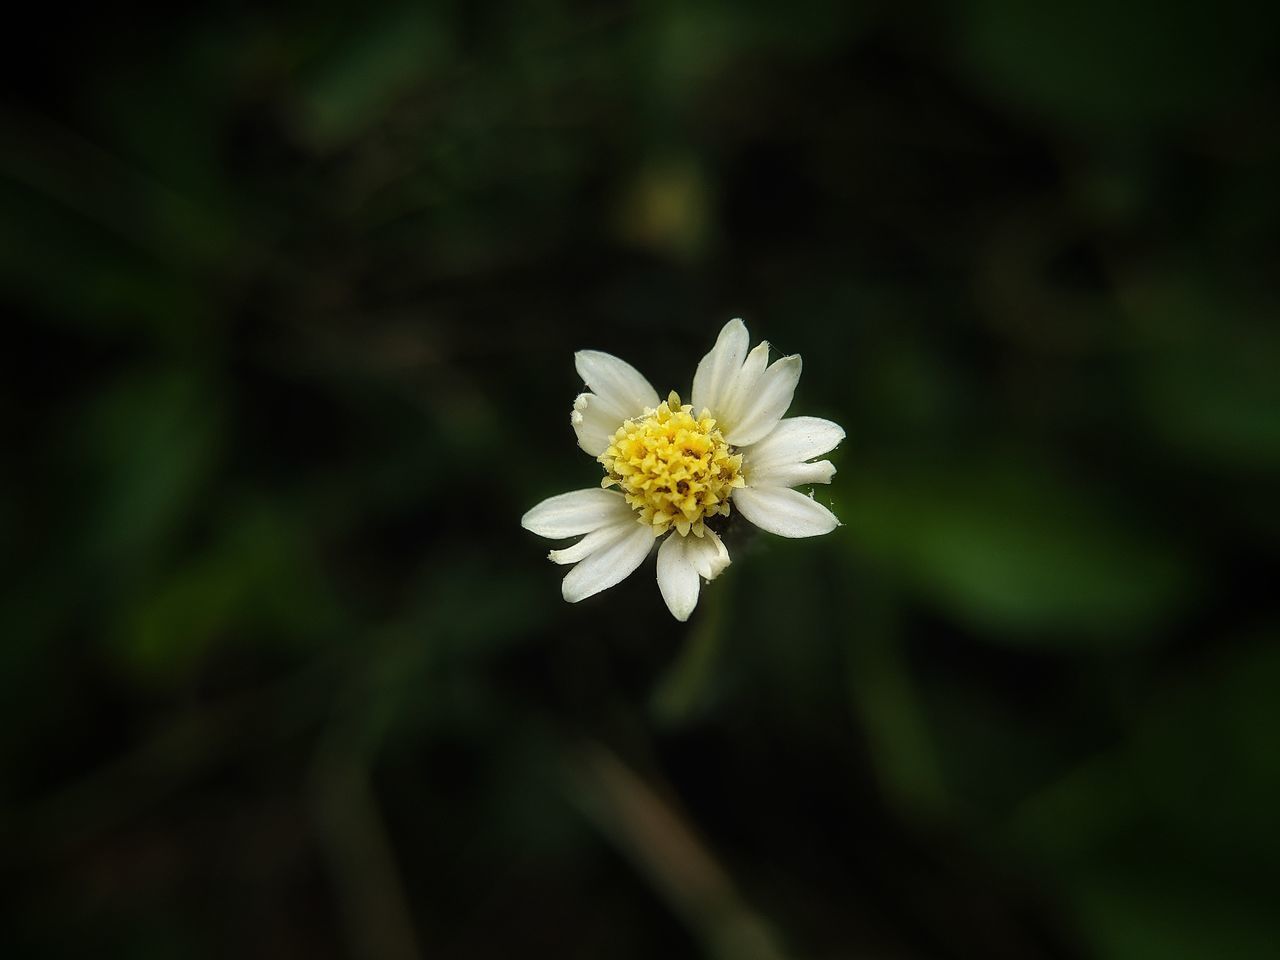 CLOSE-UP OF WHITE DAISY FLOWER